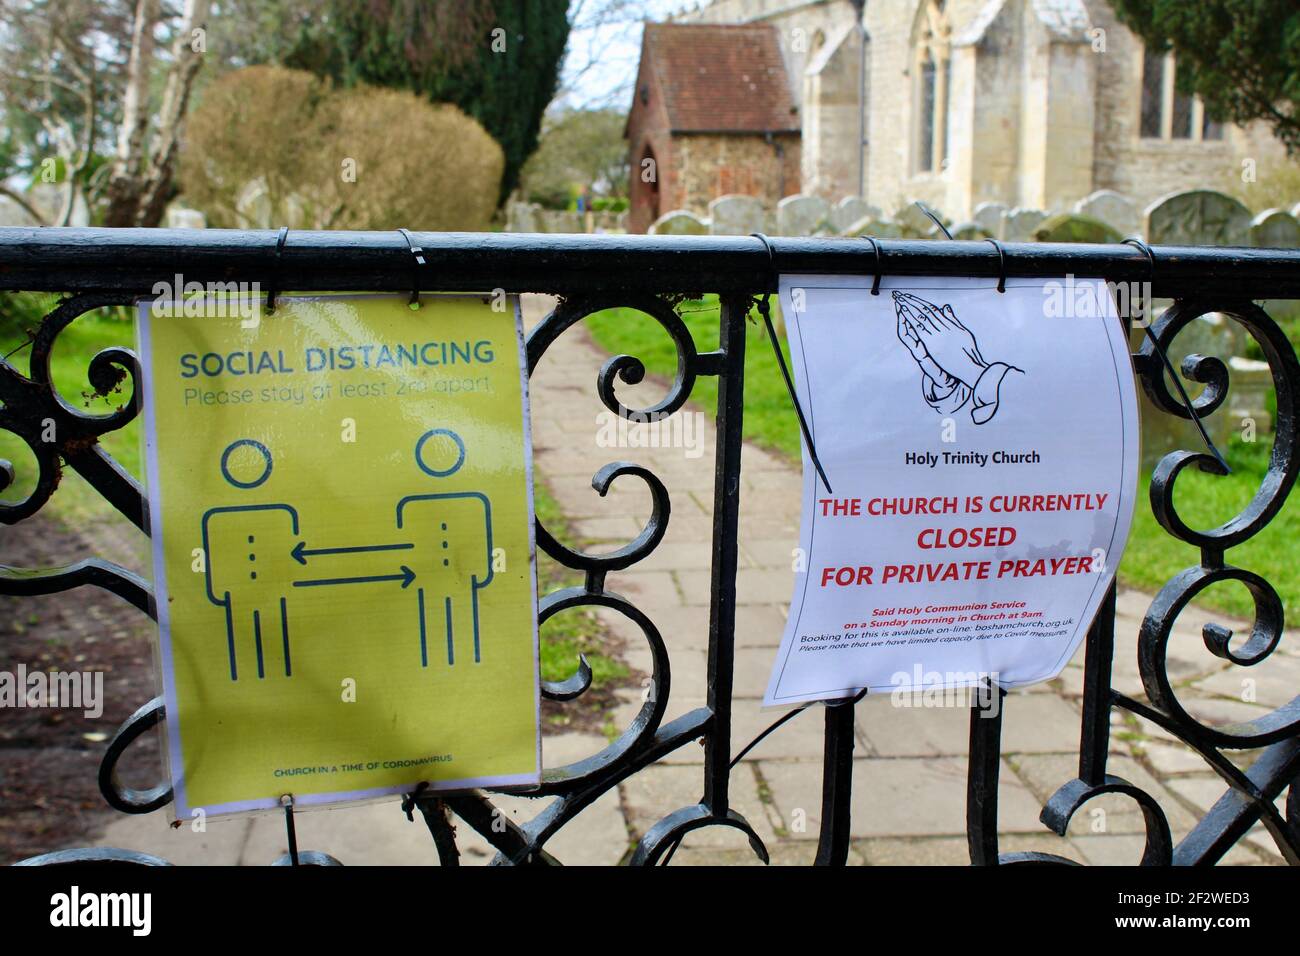 Notices on church gate informing that the church is currently closed for private prayer and social distance guidelines. Stock Photo